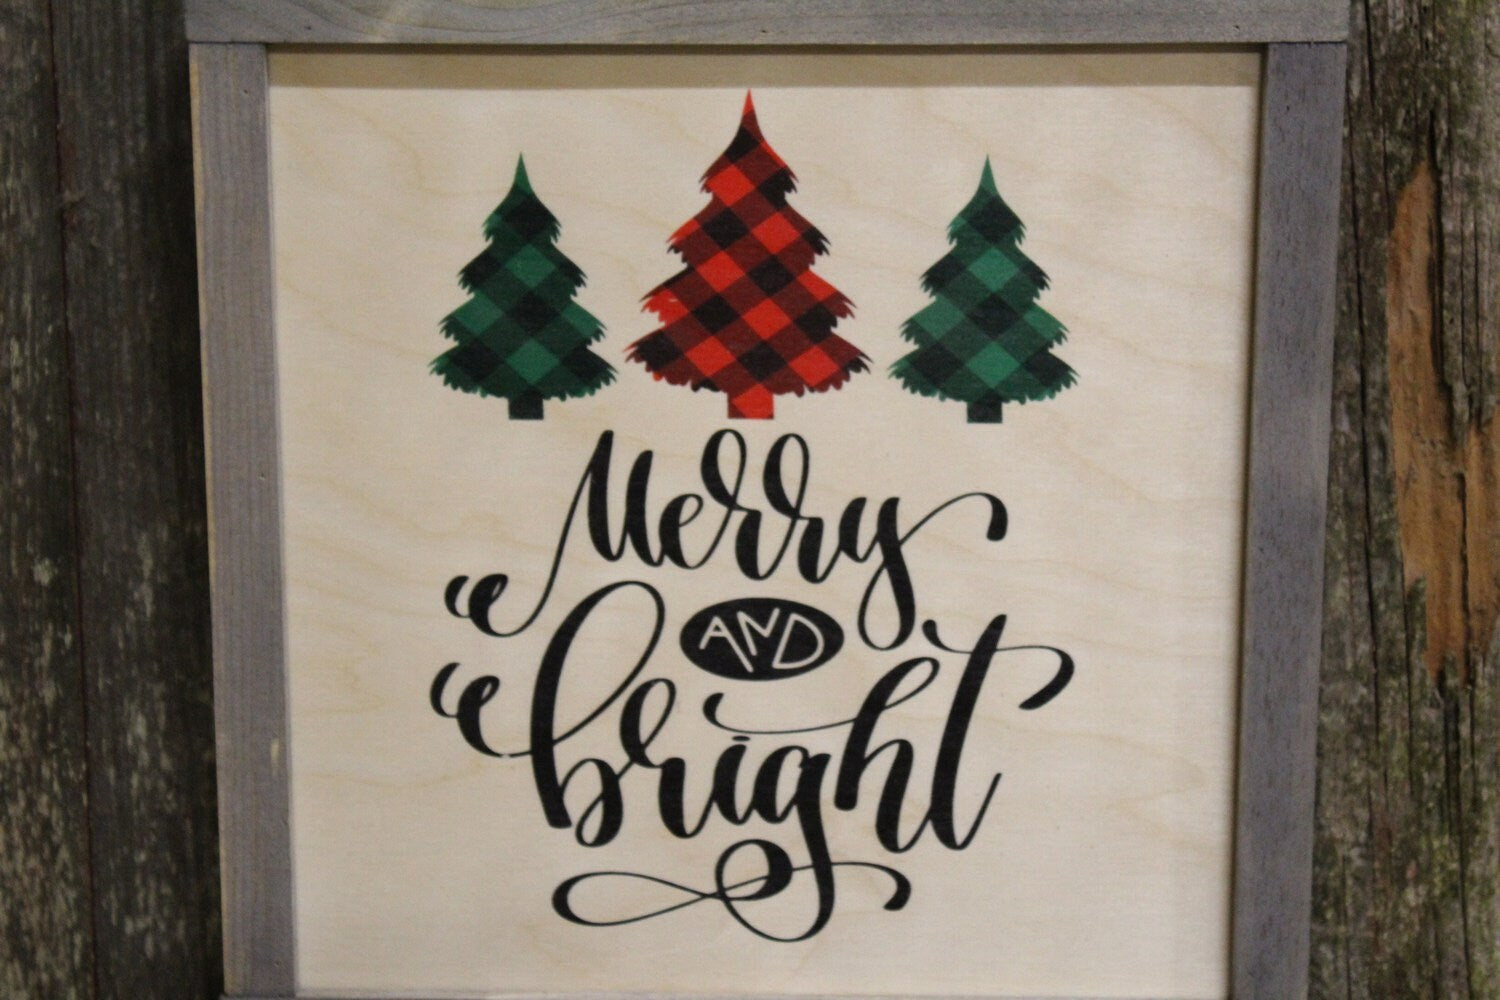 Framed Merry and Bright Wood Sign Script Text Pallet Sign Plaid Christmas Tree Decor Print Wall Art Decoration Wall Hanging Red Green Rustic